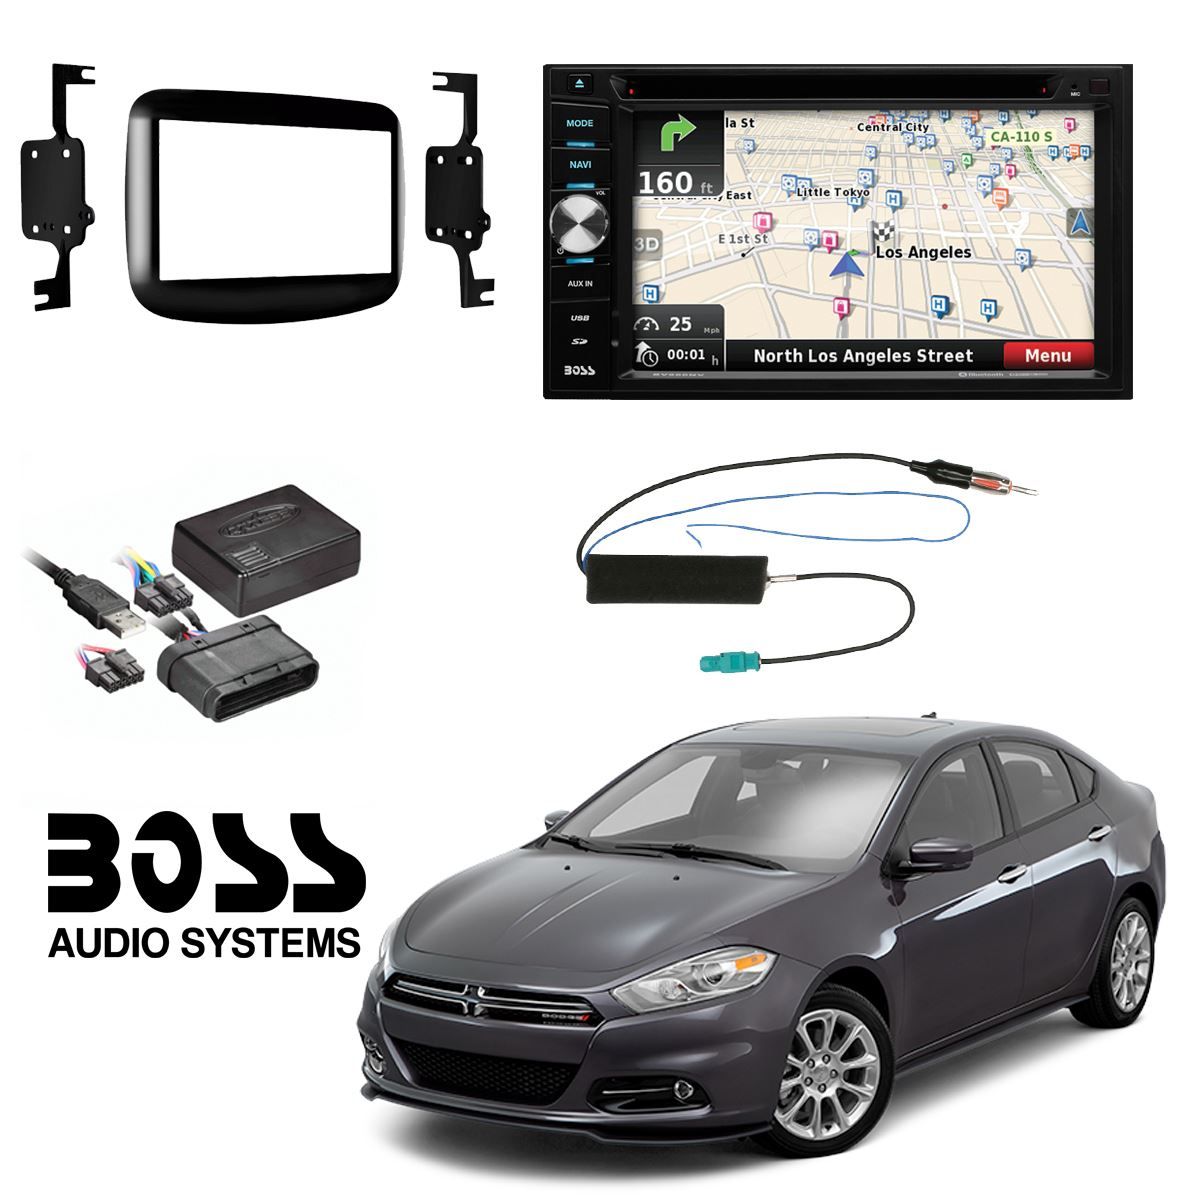 Double Din 6.2" Navigation Touchscreen Radio w/ Bluetooth for 2013+ Dodge Dart